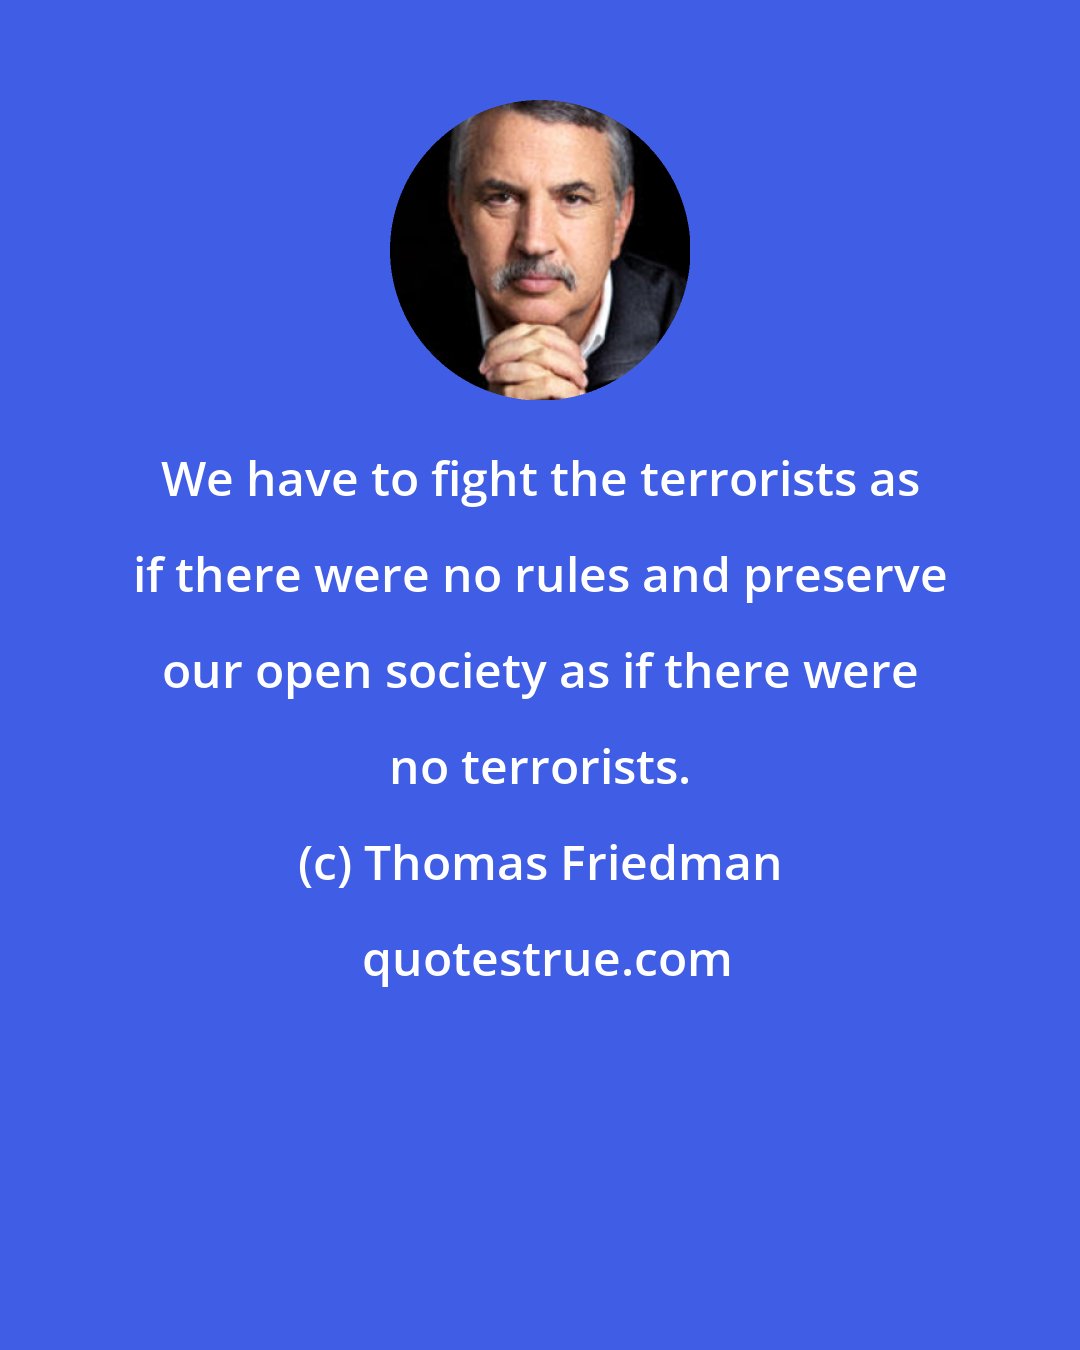 Thomas Friedman: We have to fight the terrorists as if there were no rules and preserve our open society as if there were no terrorists.